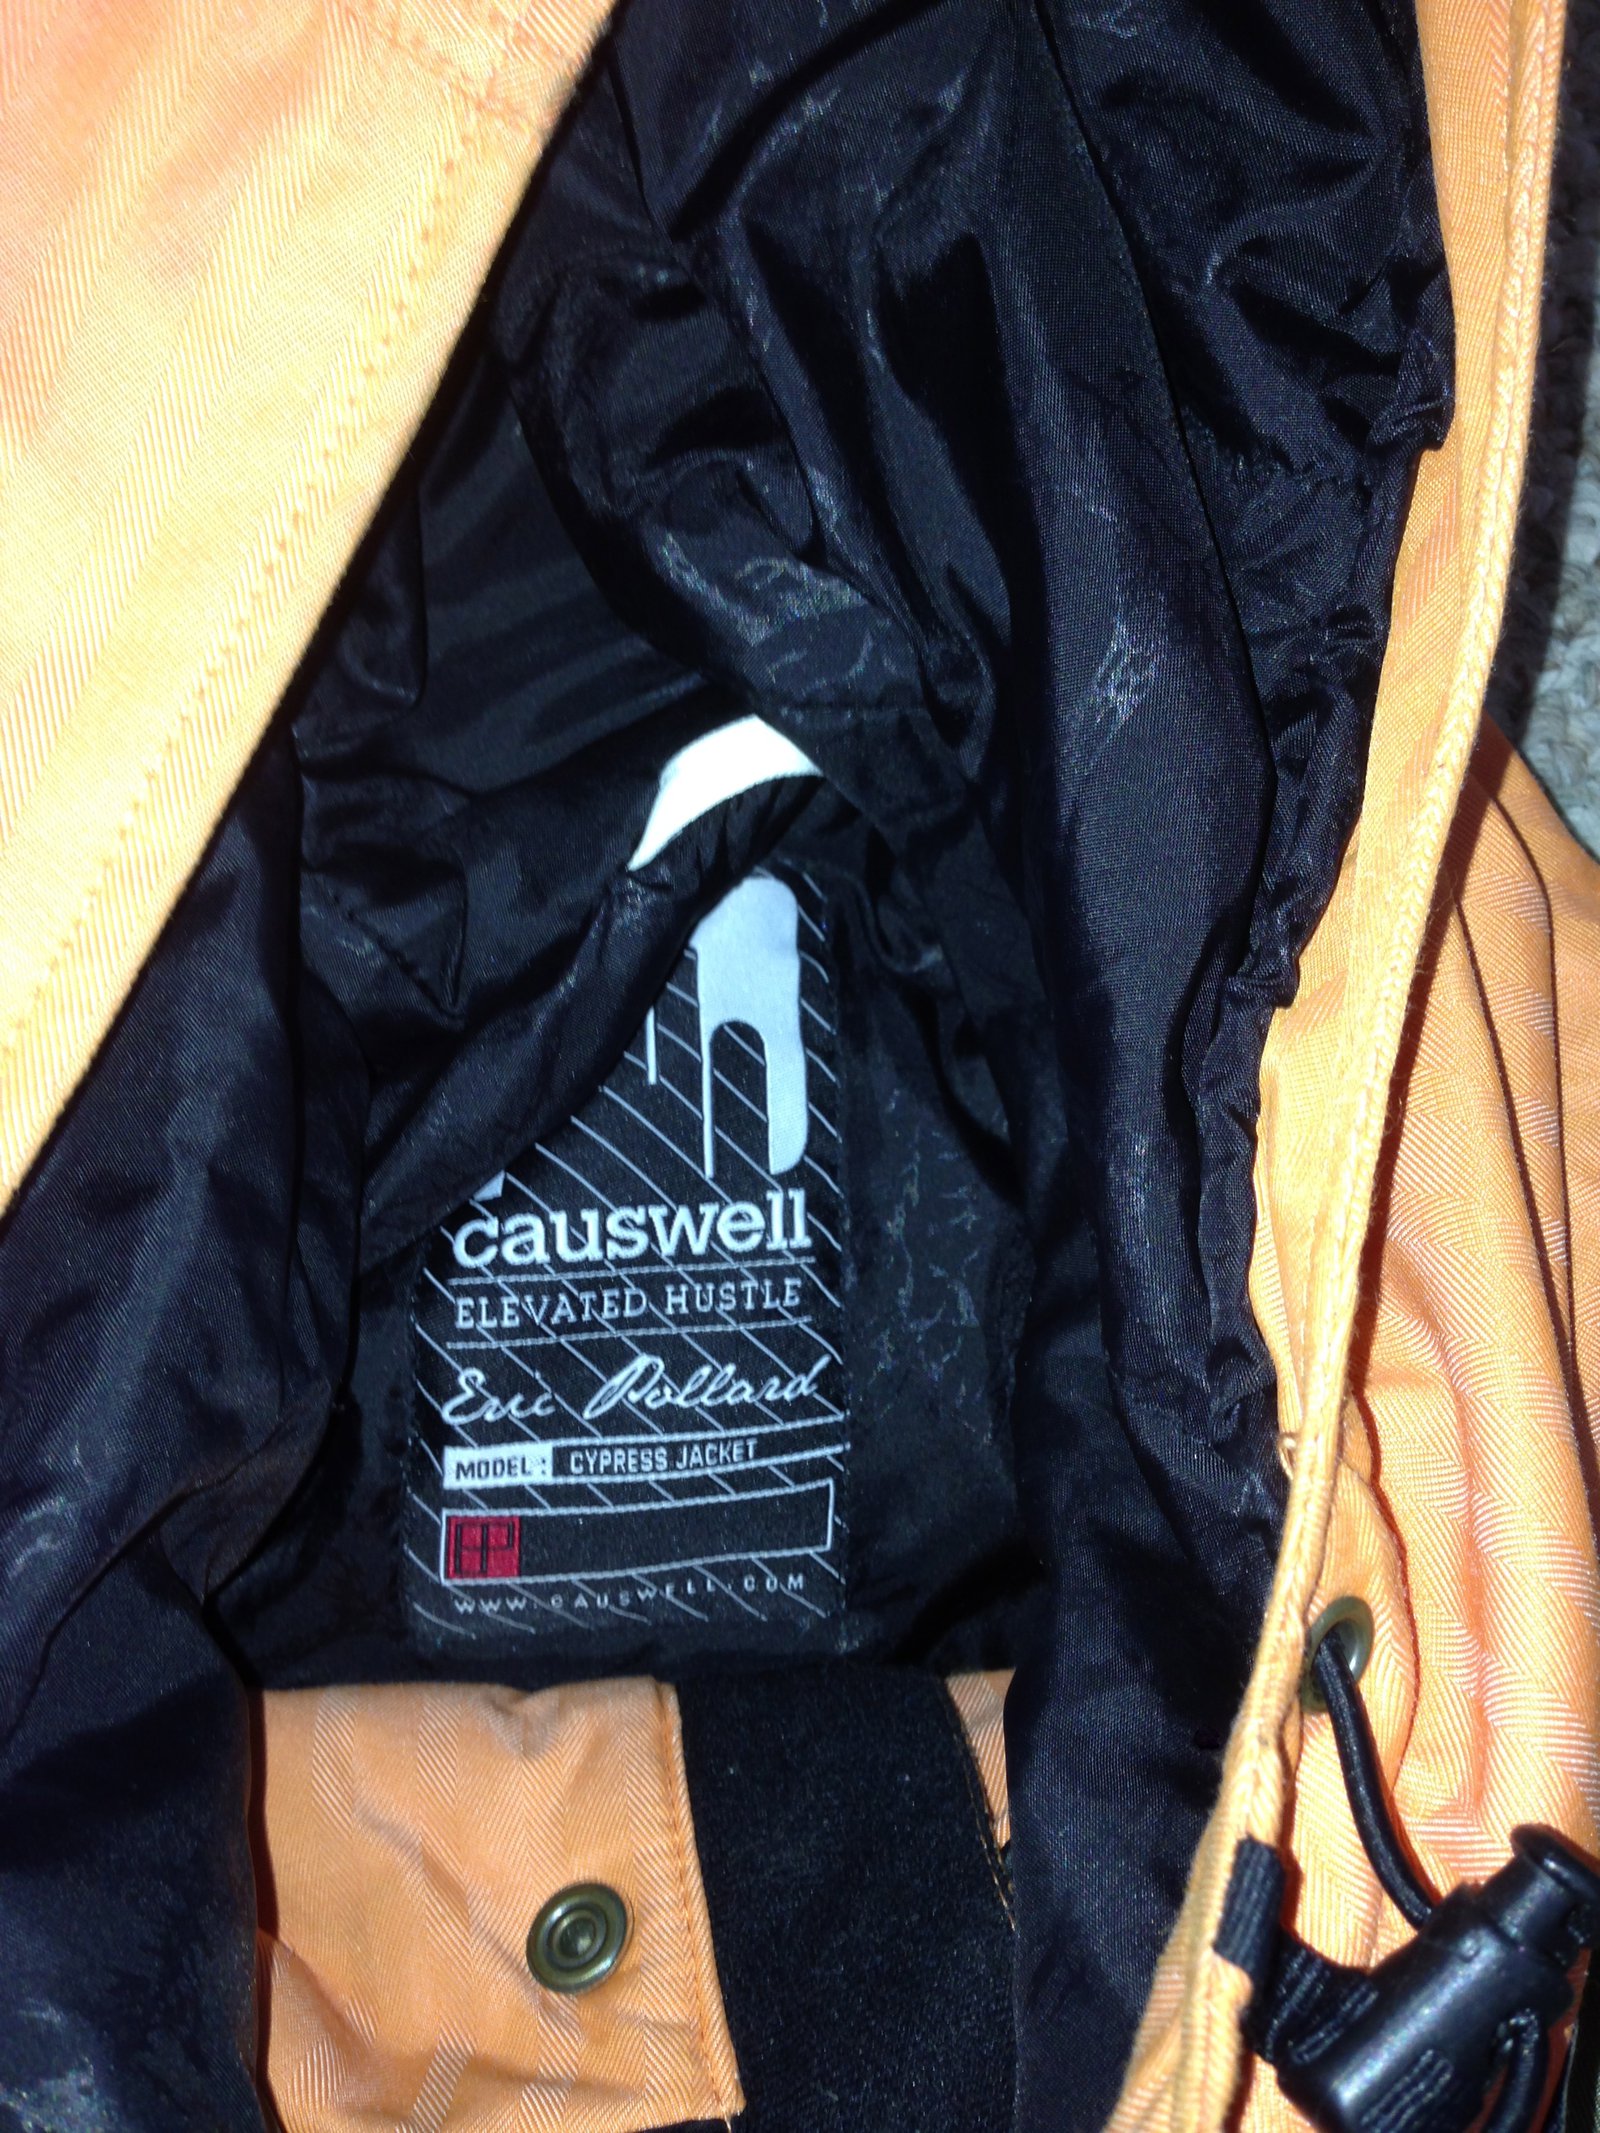 Causewell Jacket